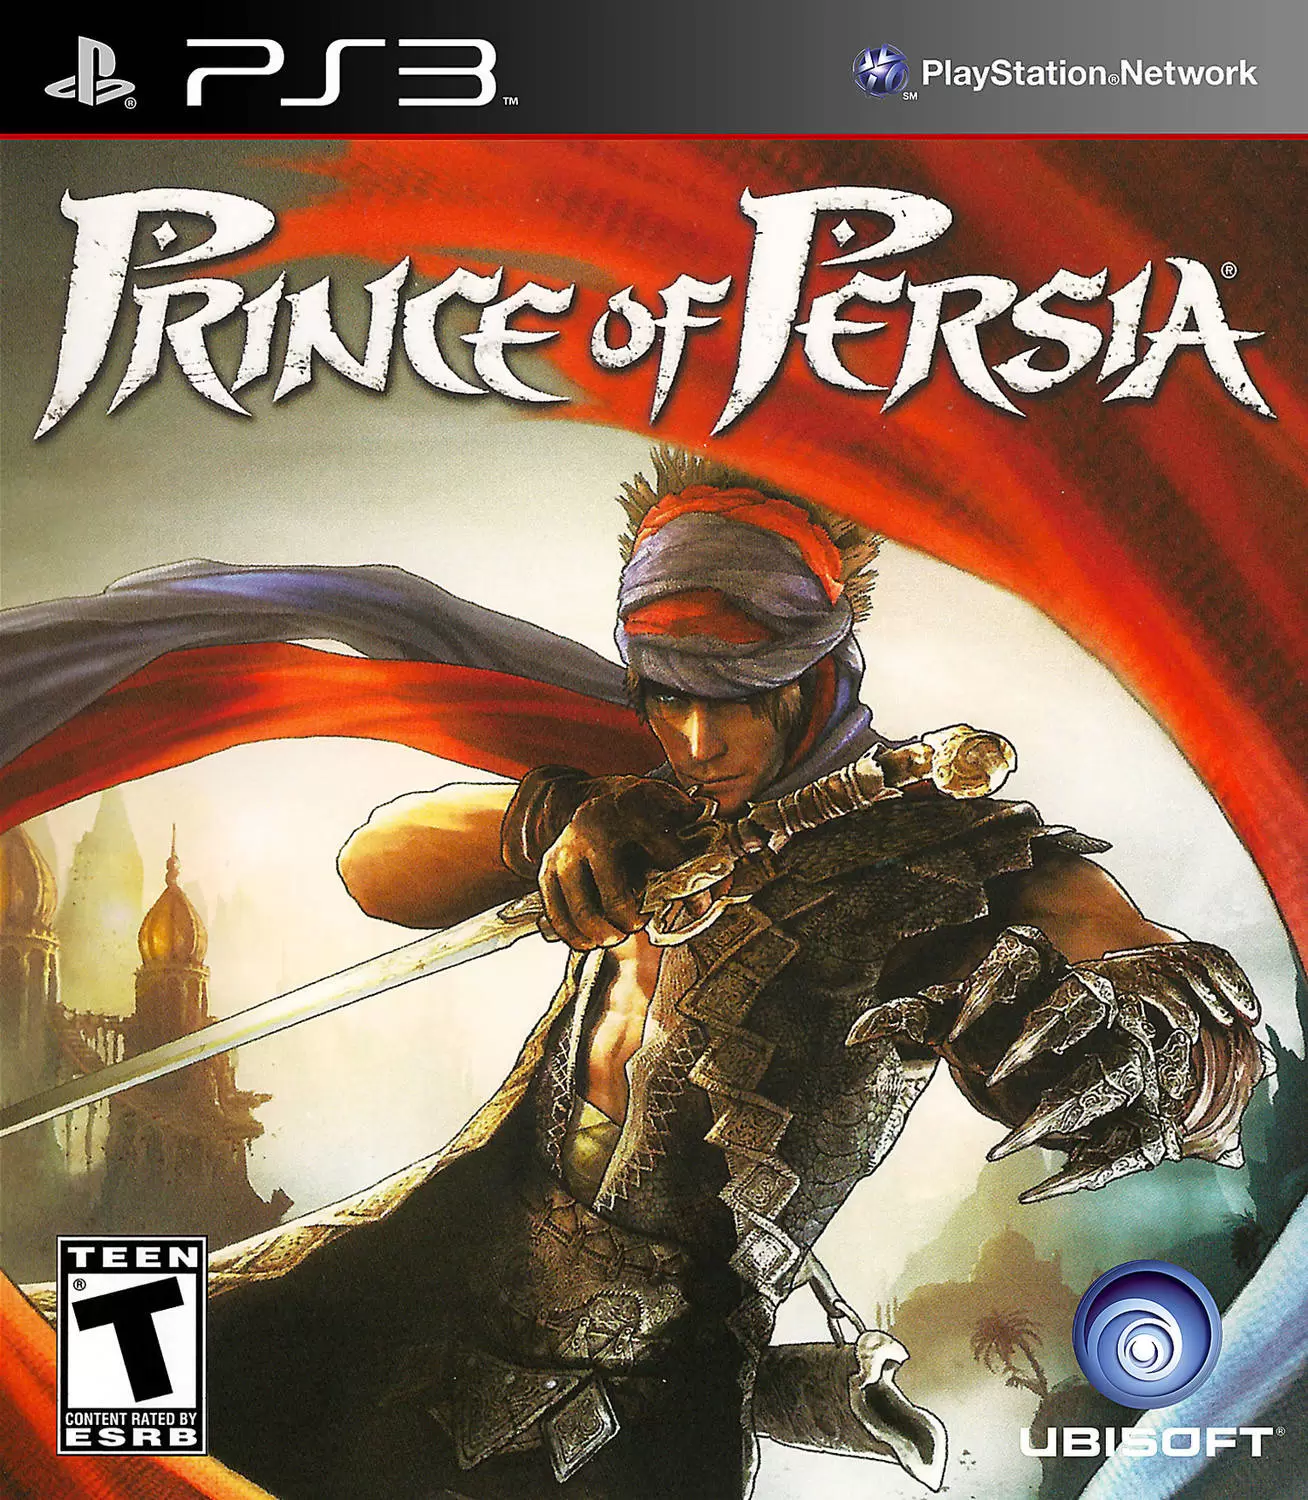 PS3 Games - Prince of Persia (2008)